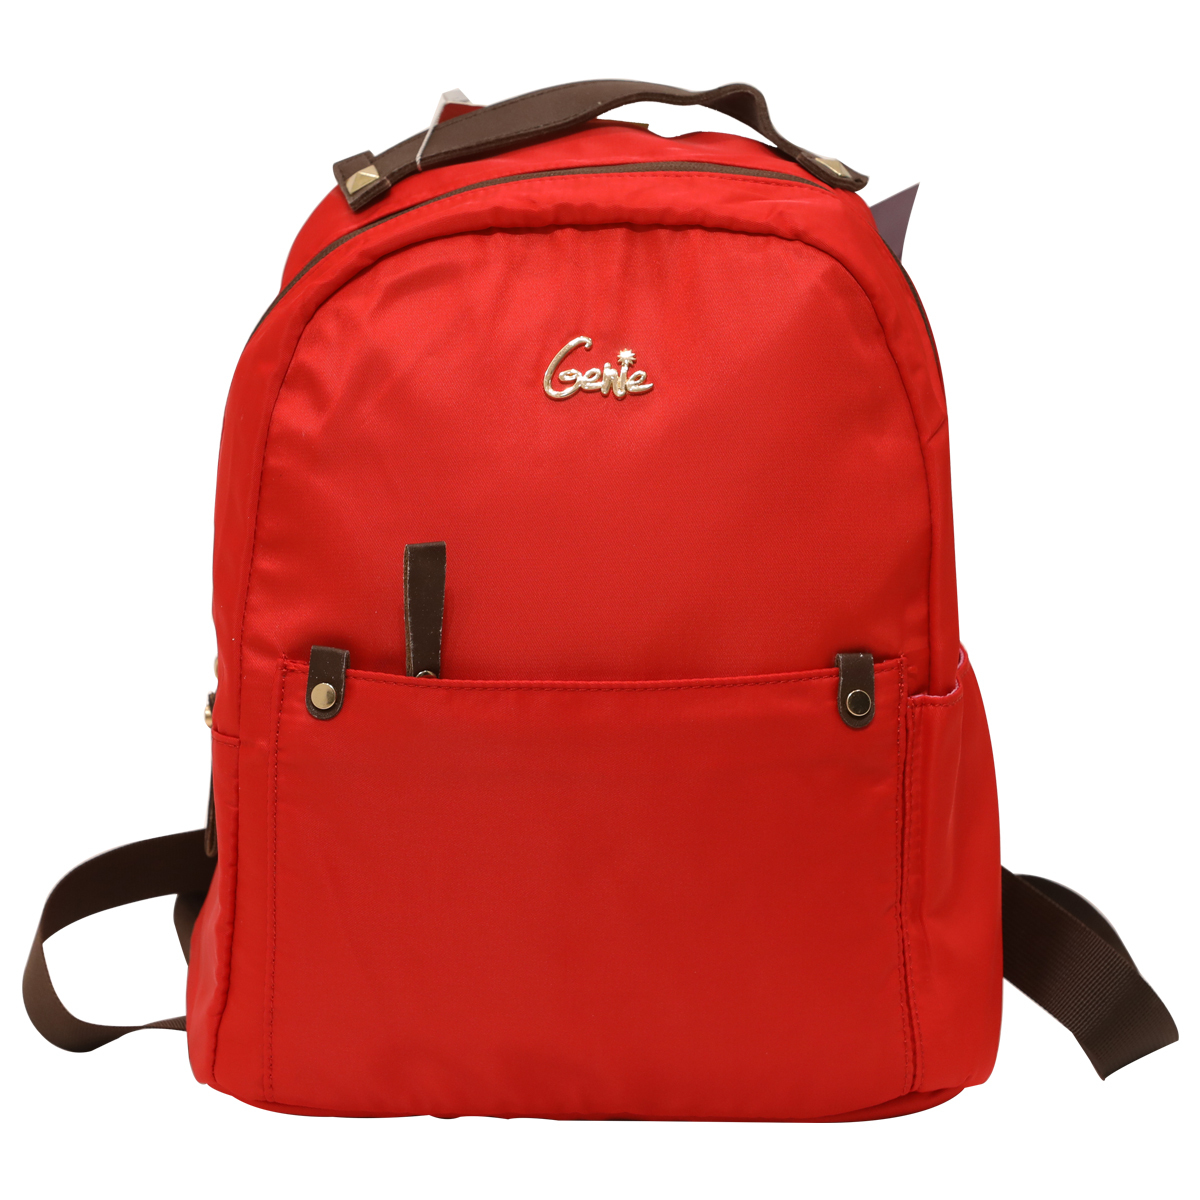 Genie Back Pack Bare Salmon Red 15in